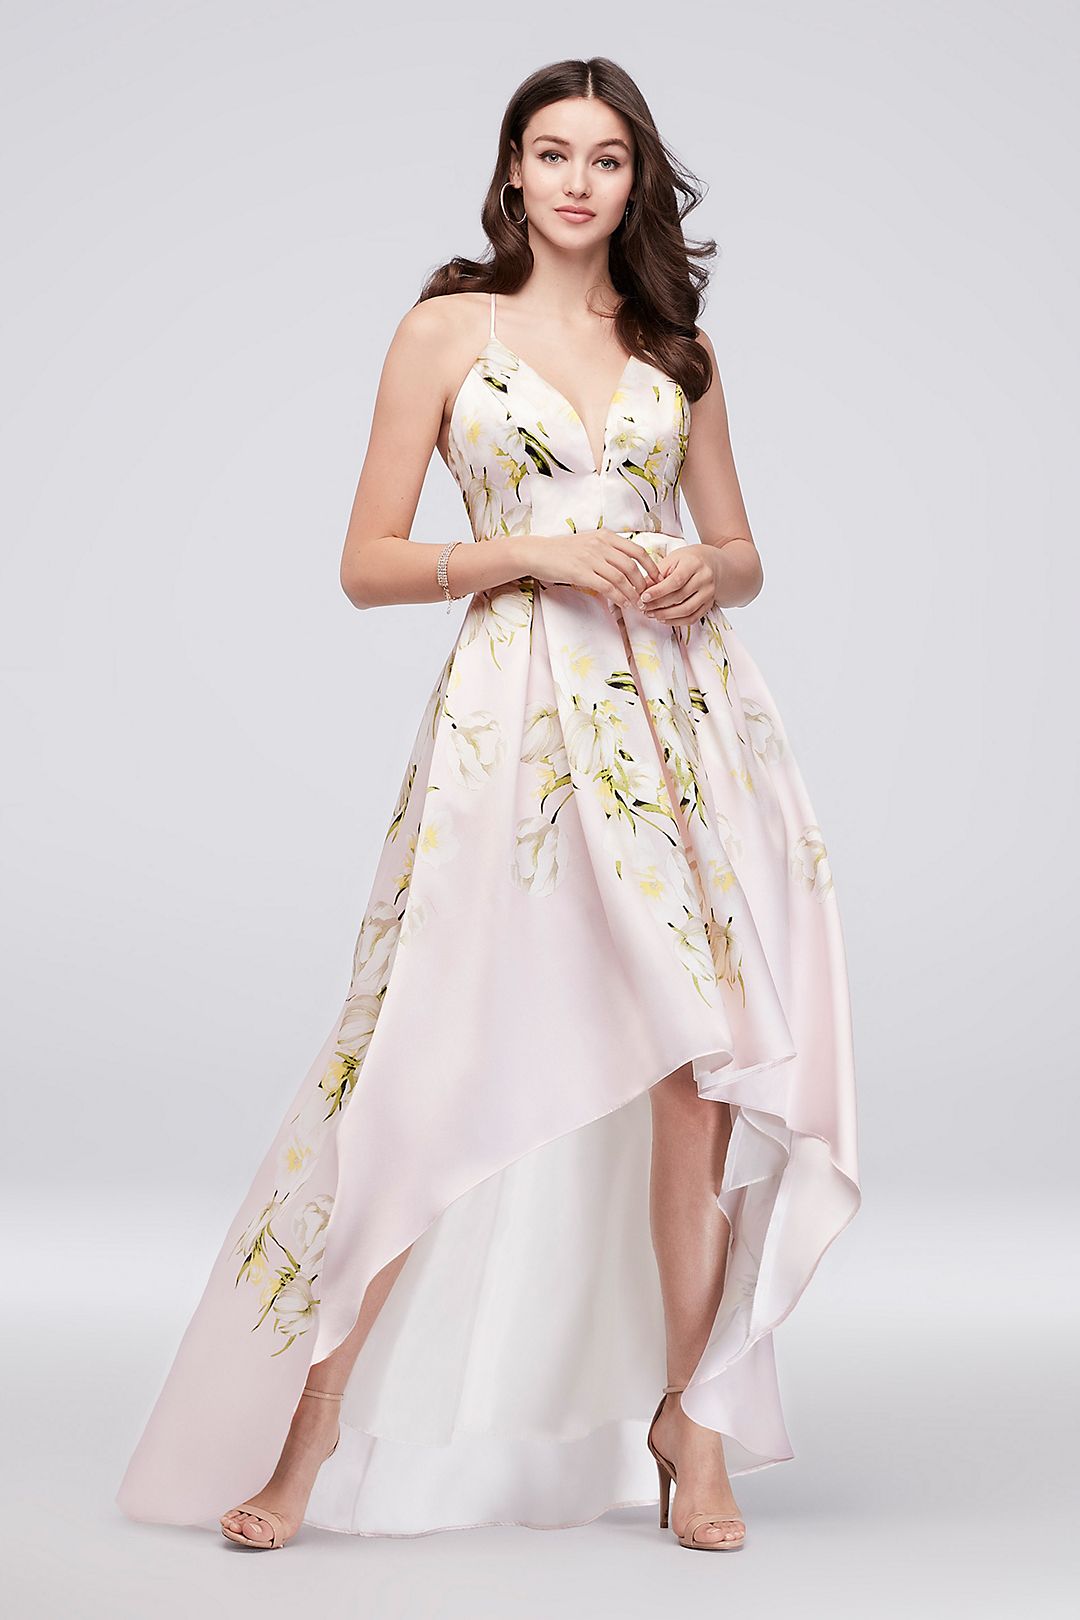 Floral Mikado Crossback High-Low Ball Gown Image 4